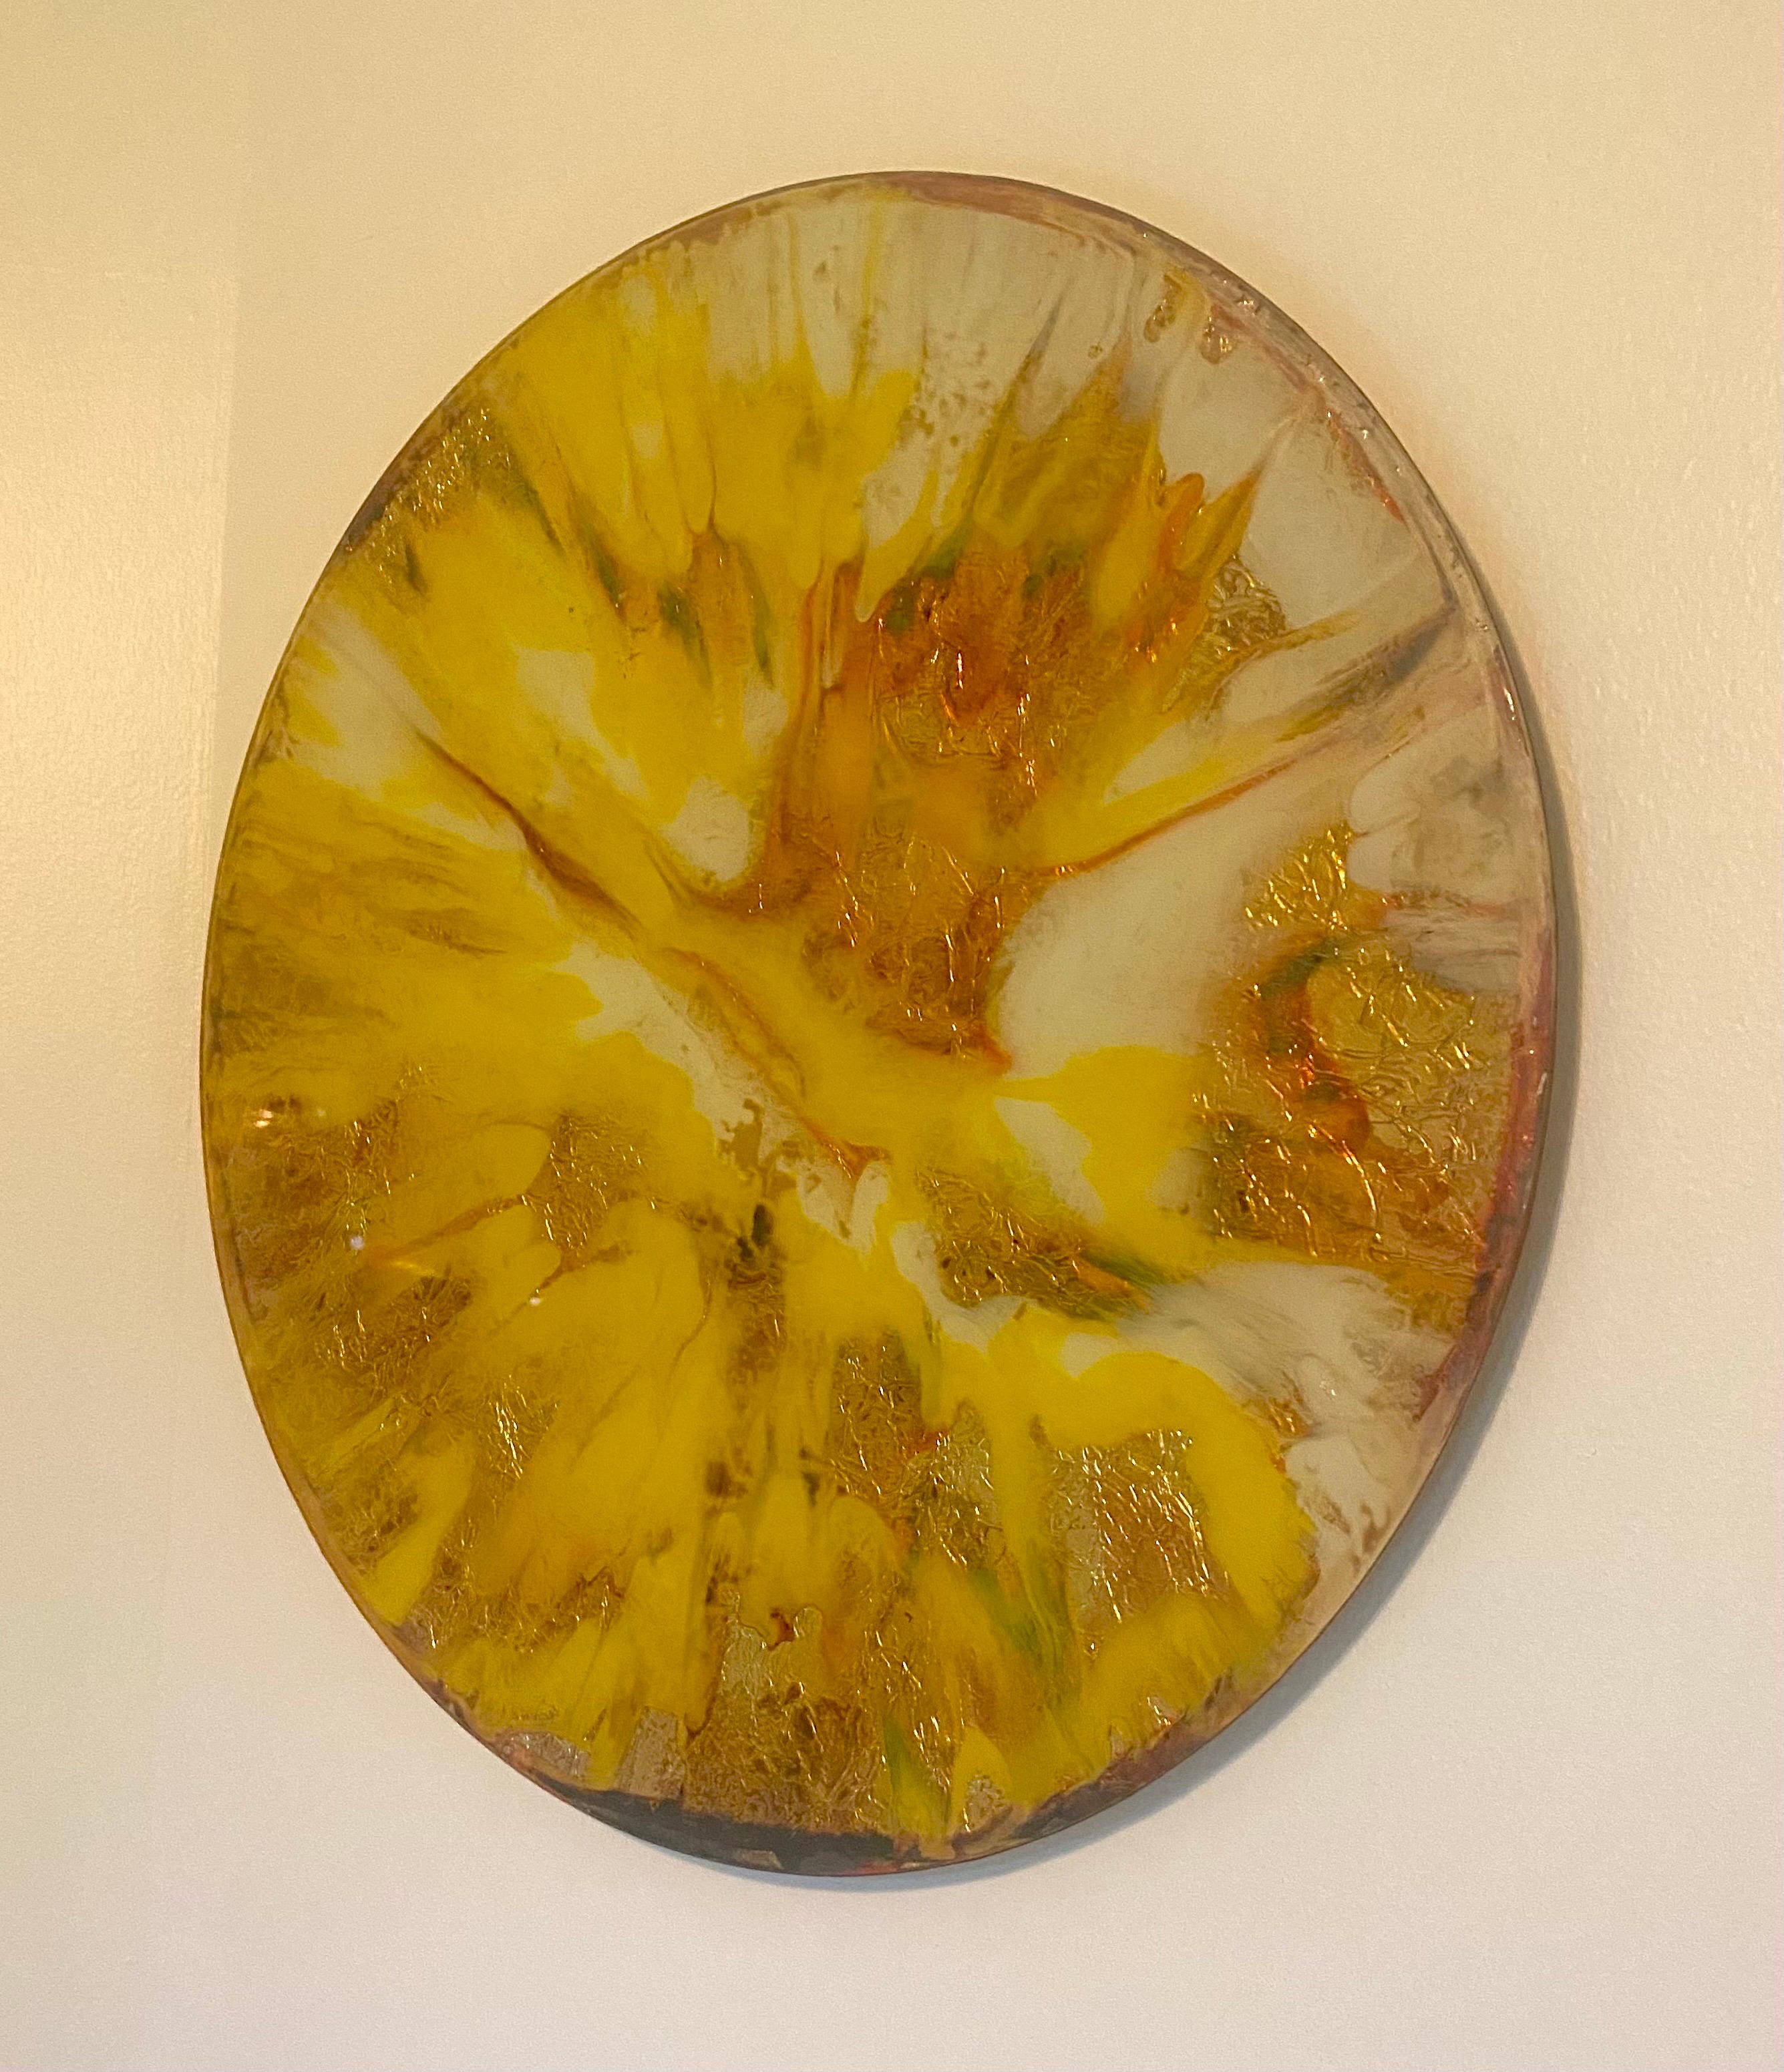 A very unique handmade mixed media glass, gold leaf, thick acrylic paint, in abstract, wall art disc. The backing is in hide with wiring for hanging. This wall sculpture is a joyful piece of sunshine in the home.